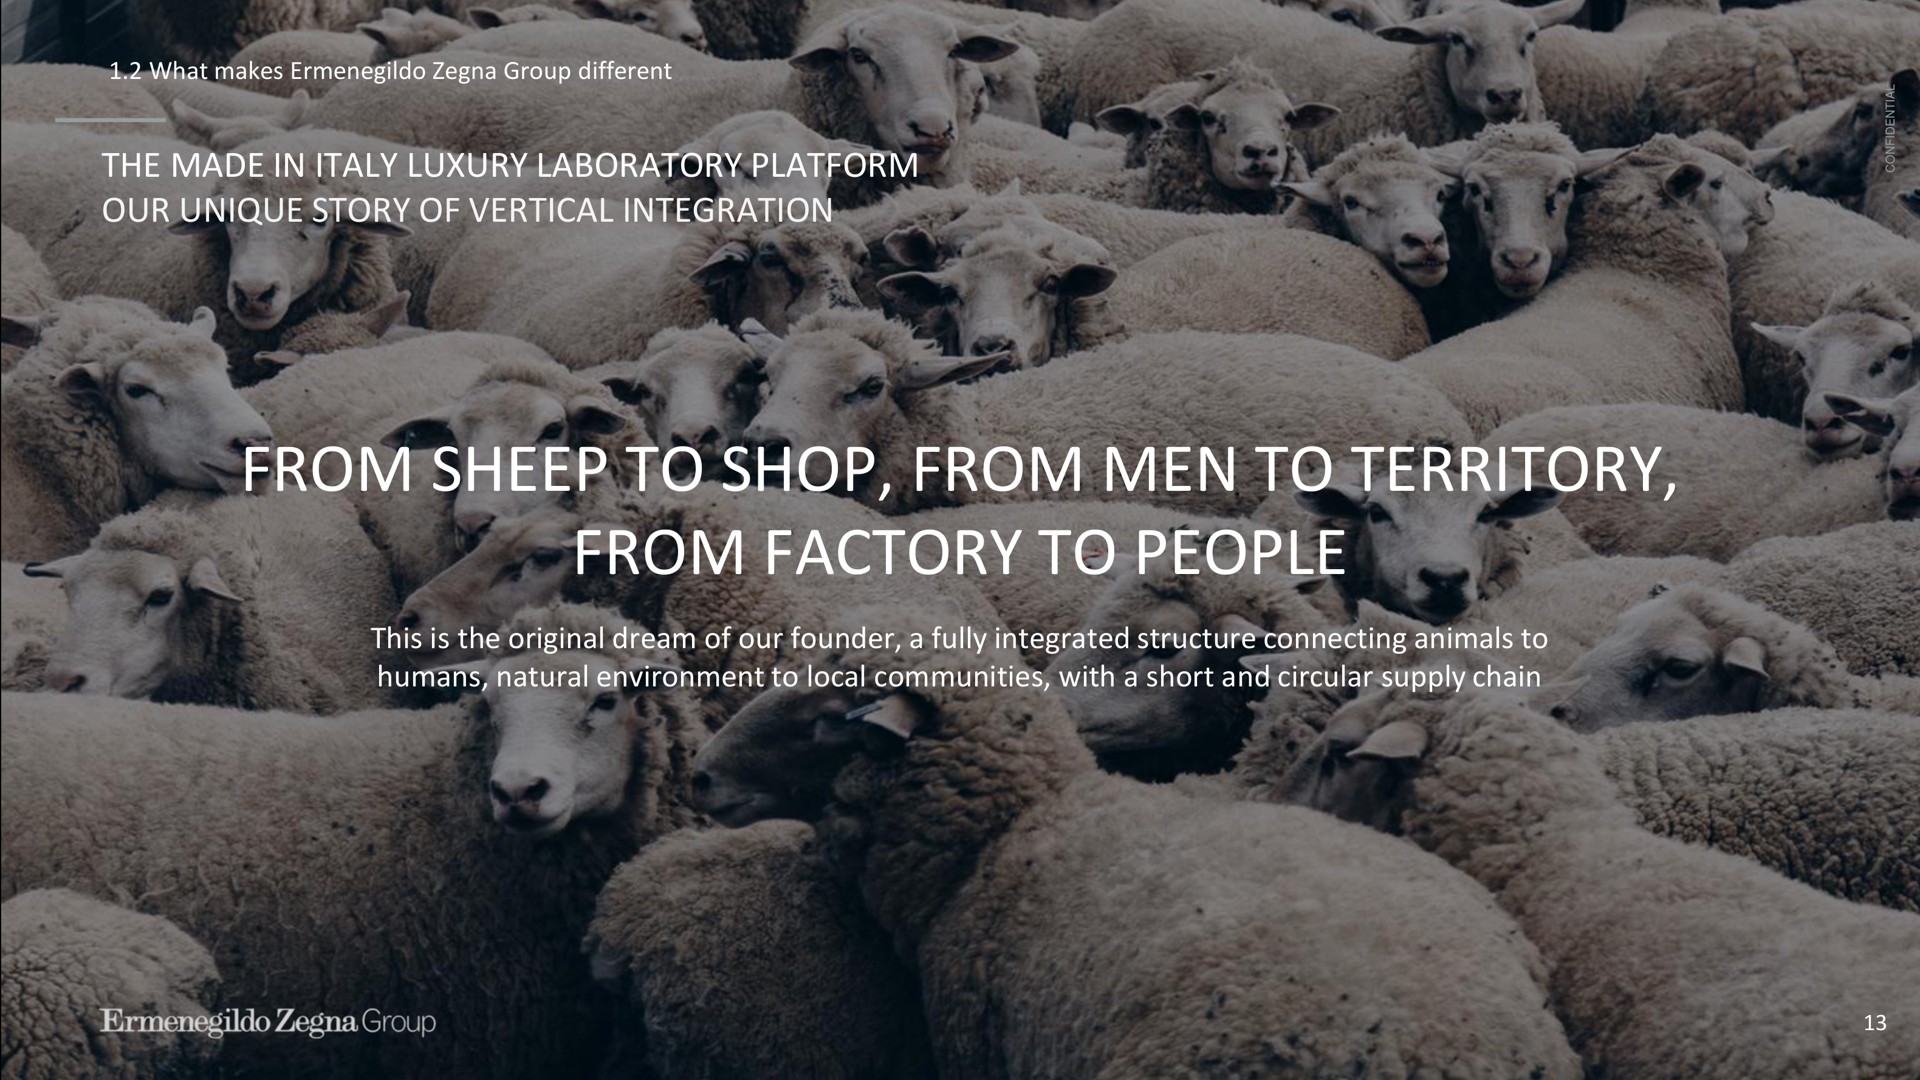 what makes group different the made in luxury laboratory platform our unique story of vertical integration from sheep to shop from men to territory from factory to people this is the original dream of our founder a fully integrated structure connecting animals to humans natural environment to local communities with a short and circular supply chain | Zegna